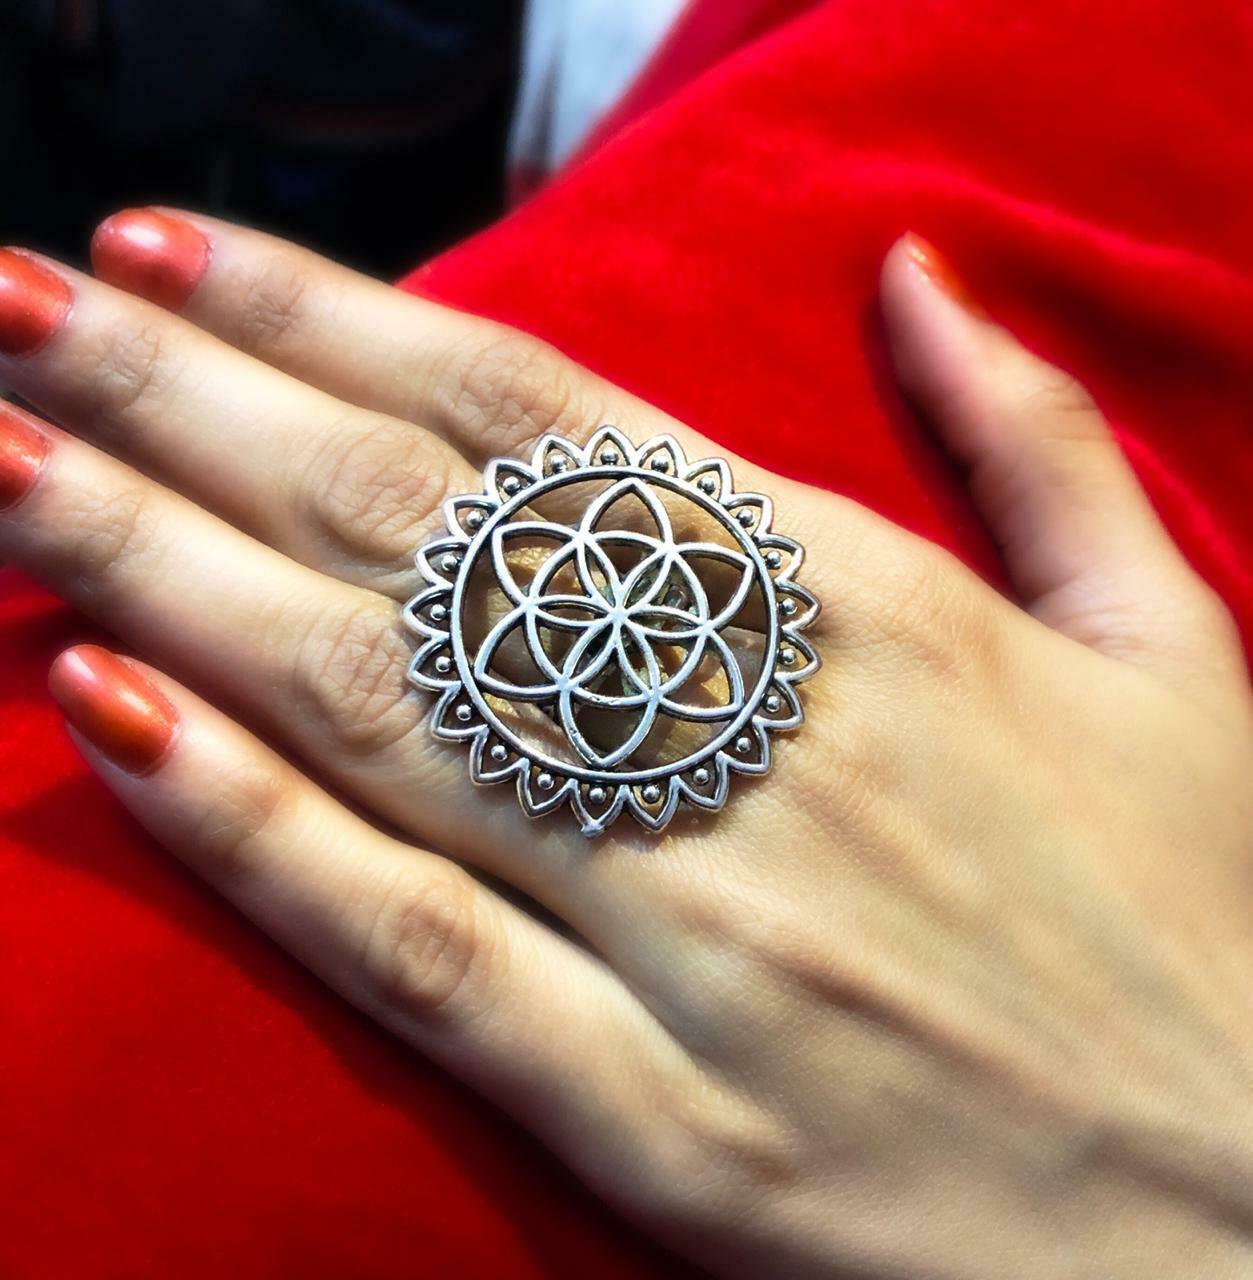 New Bollywood Trending Oxidized Silver Plated Adjustable Ring Jewelry For Women